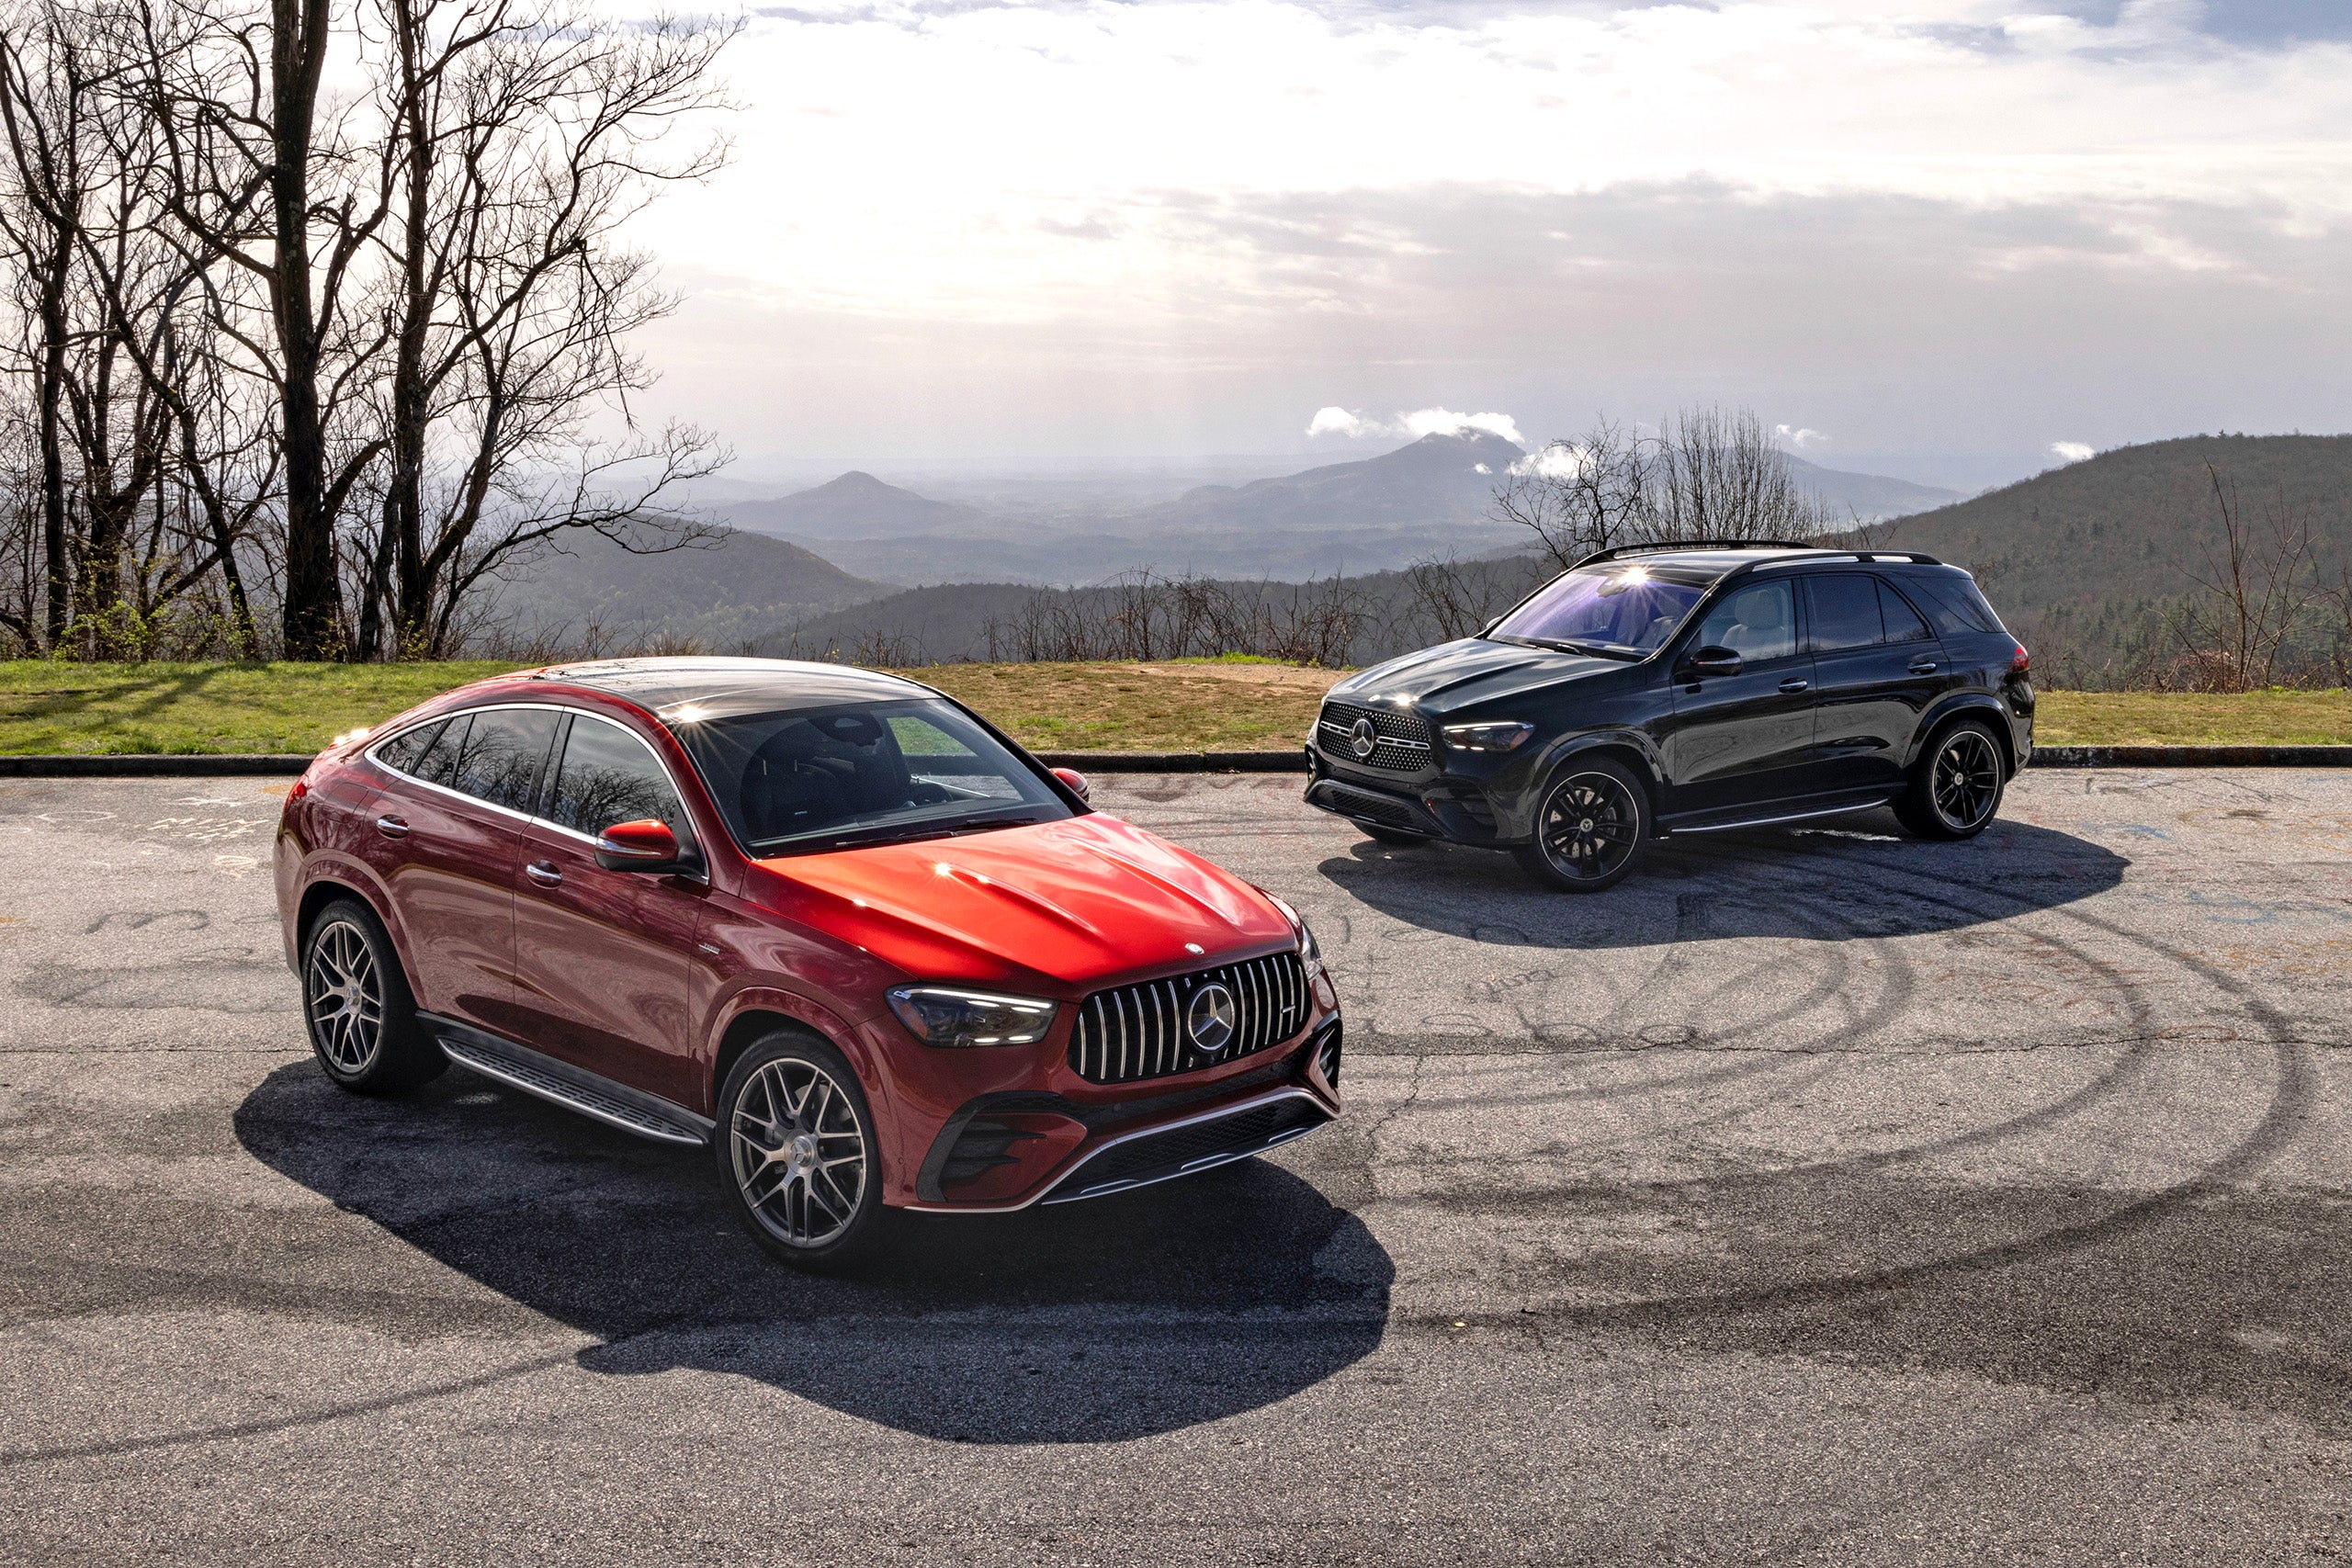 Mercedes-AMG GLE 53 4MATIC+ Coupe, at left, and GLE 63 S 4MATIC+ SUV.